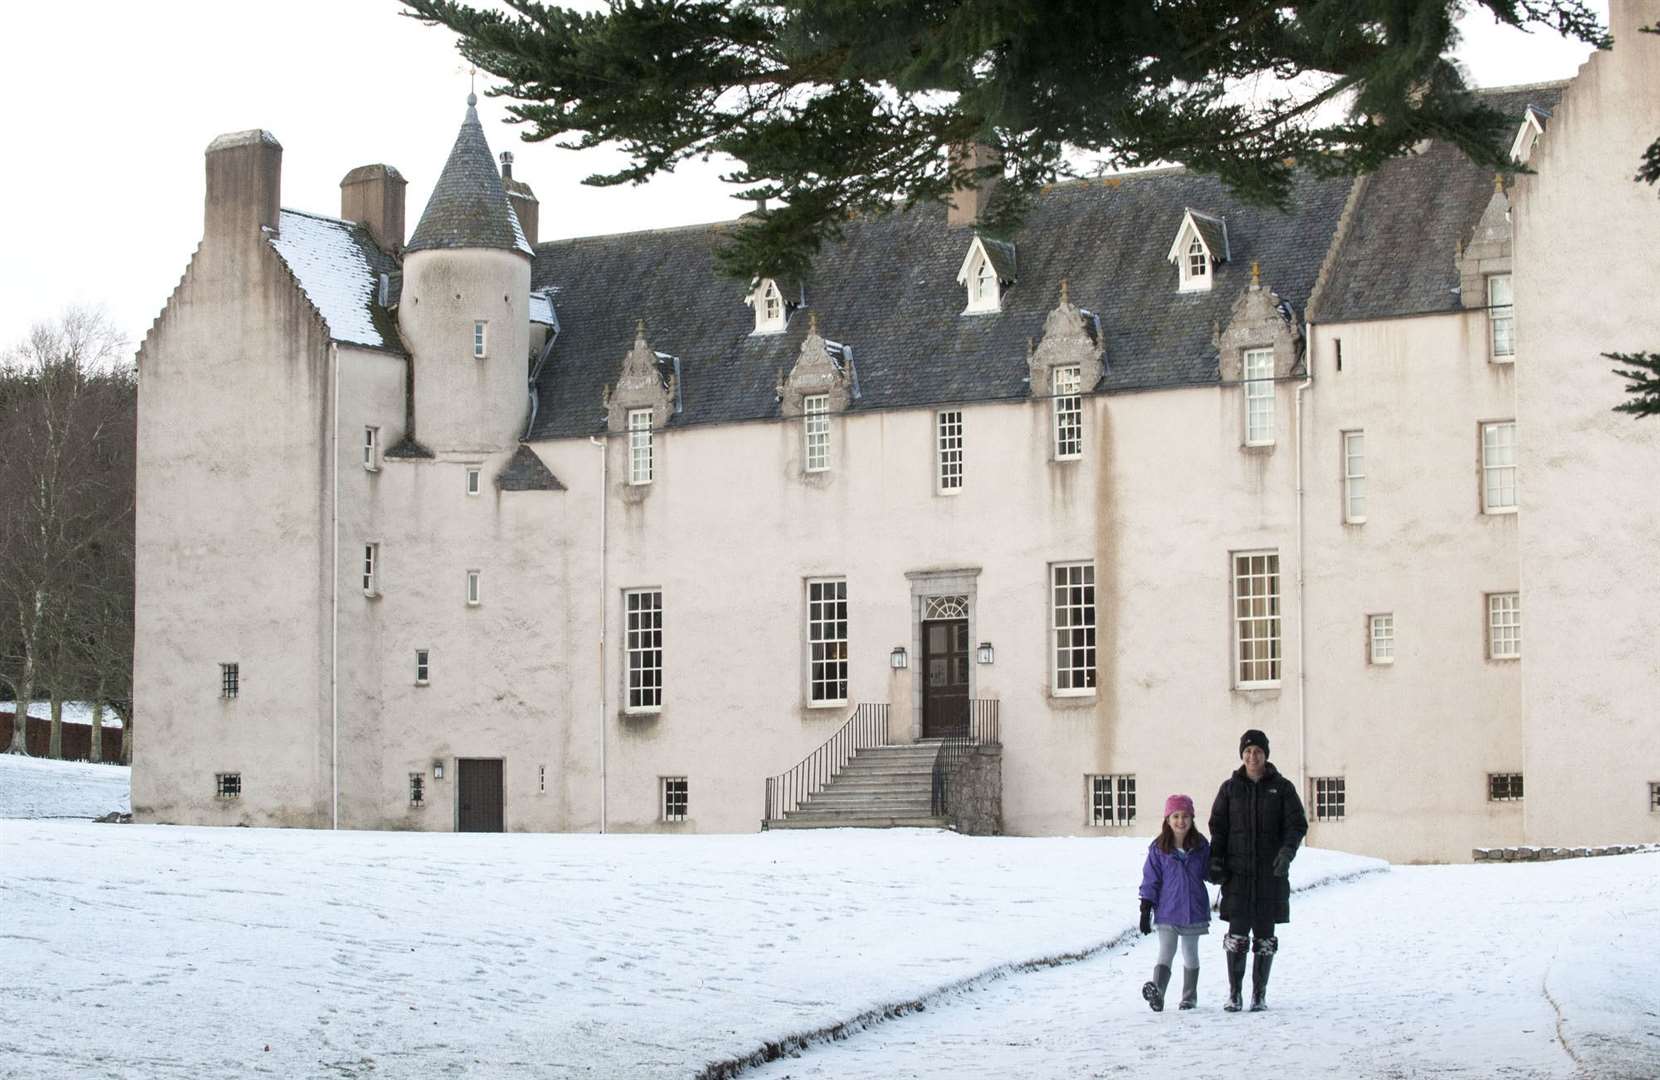 Drum Castle is one of the historic venues holding festive events.